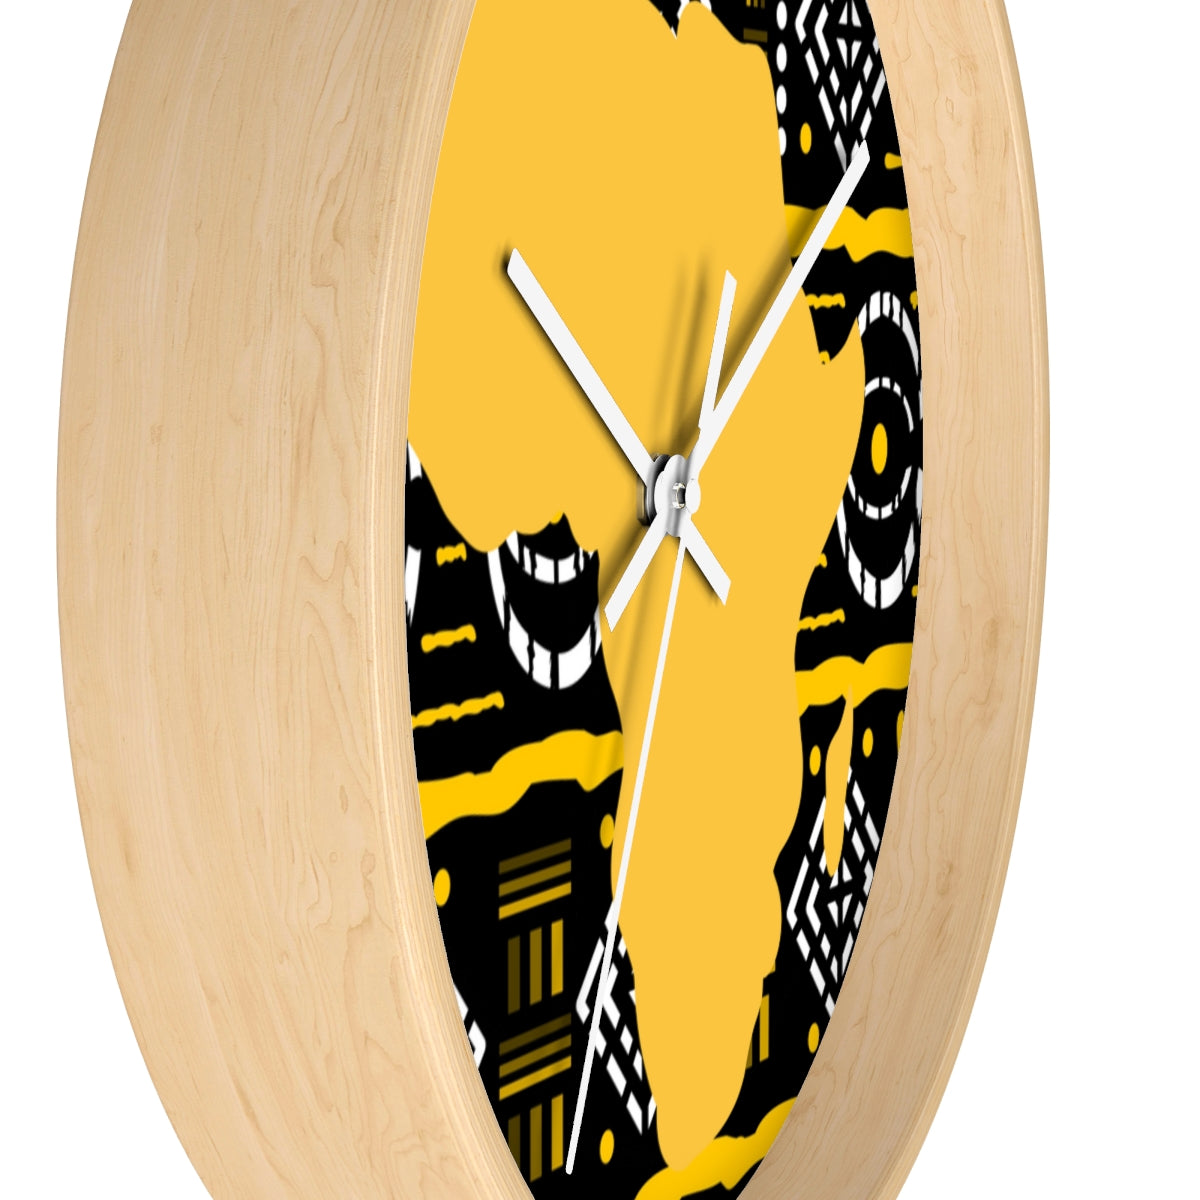 Map of Africa Yellow African Print Wall Clock